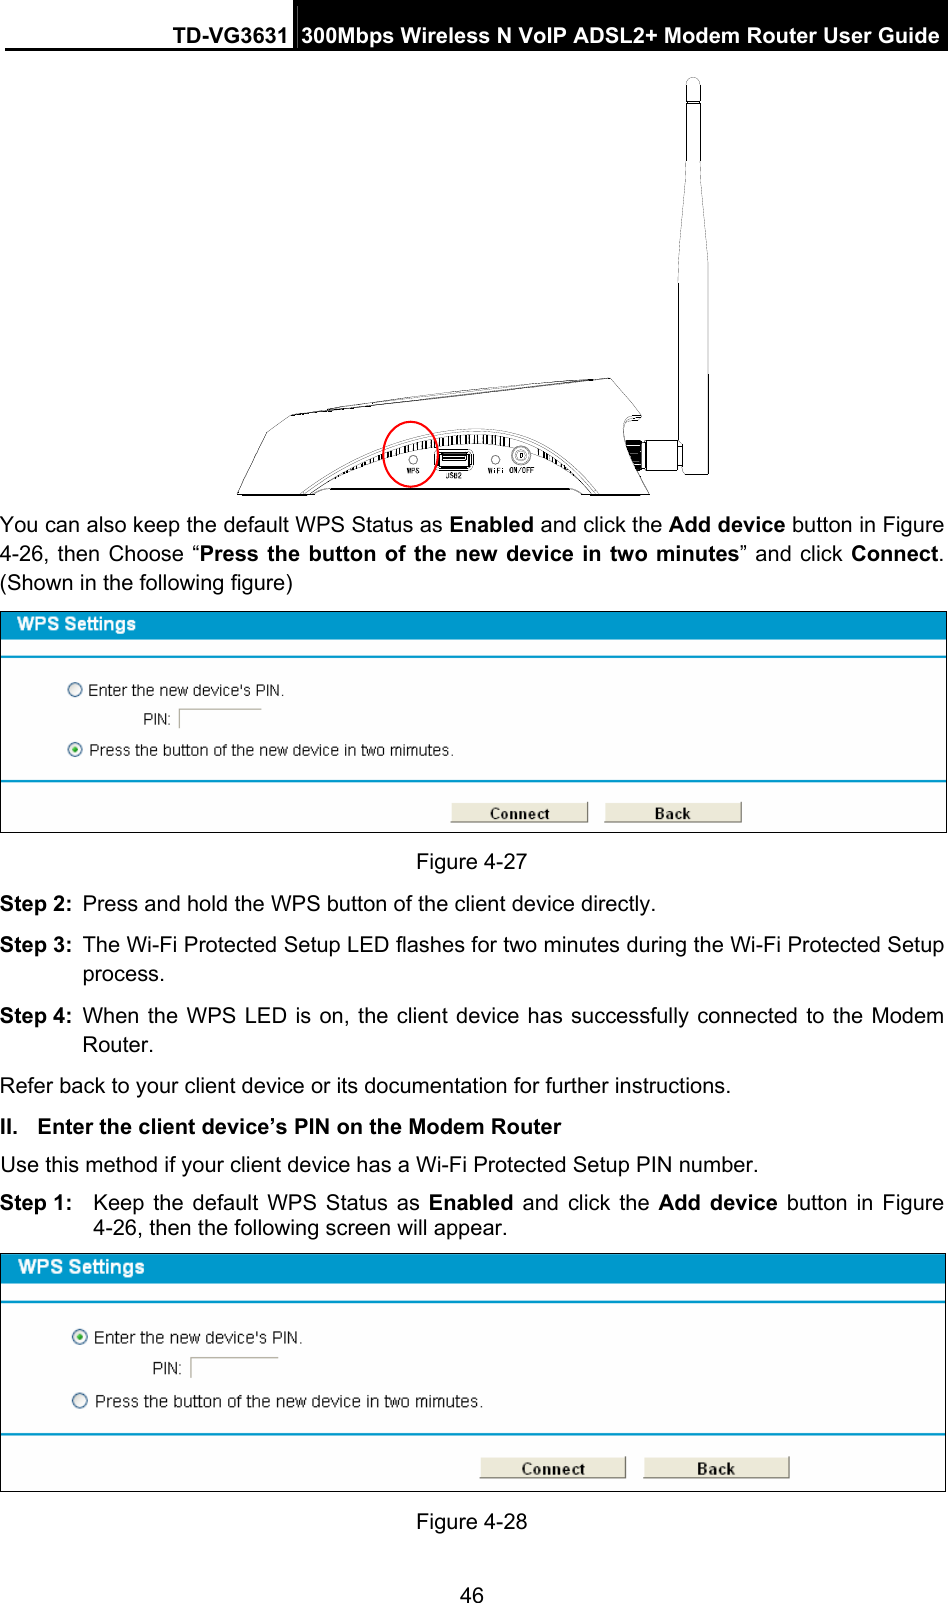 TD-VG3631 300Mbps Wireless N VoIP ADSL2+ Modem Router User Guide 46  You can also keep the default WPS Status as Enabled and click the Add device button in Figure 4-26, then Choose “Press the button of the new device in two minutes” and click Connect. (Shown in the following figure)  Figure 4-27 Step 2:  Press and hold the WPS button of the client device directly.   Step 3:  The Wi-Fi Protected Setup LED flashes for two minutes during the Wi-Fi Protected Setup process.  Step 4:  When the WPS LED is on, the client device has successfully connected to the Modem Router.  Refer back to your client device or its documentation for further instructions. II.  Enter the client device’s PIN on the Modem Router Use this method if your client device has a Wi-Fi Protected Setup PIN number. Step 1:  Keep the default WPS Status as Enabled and click the Add device button in Figure 4-26, then the following screen will appear.    Figure 4-28 